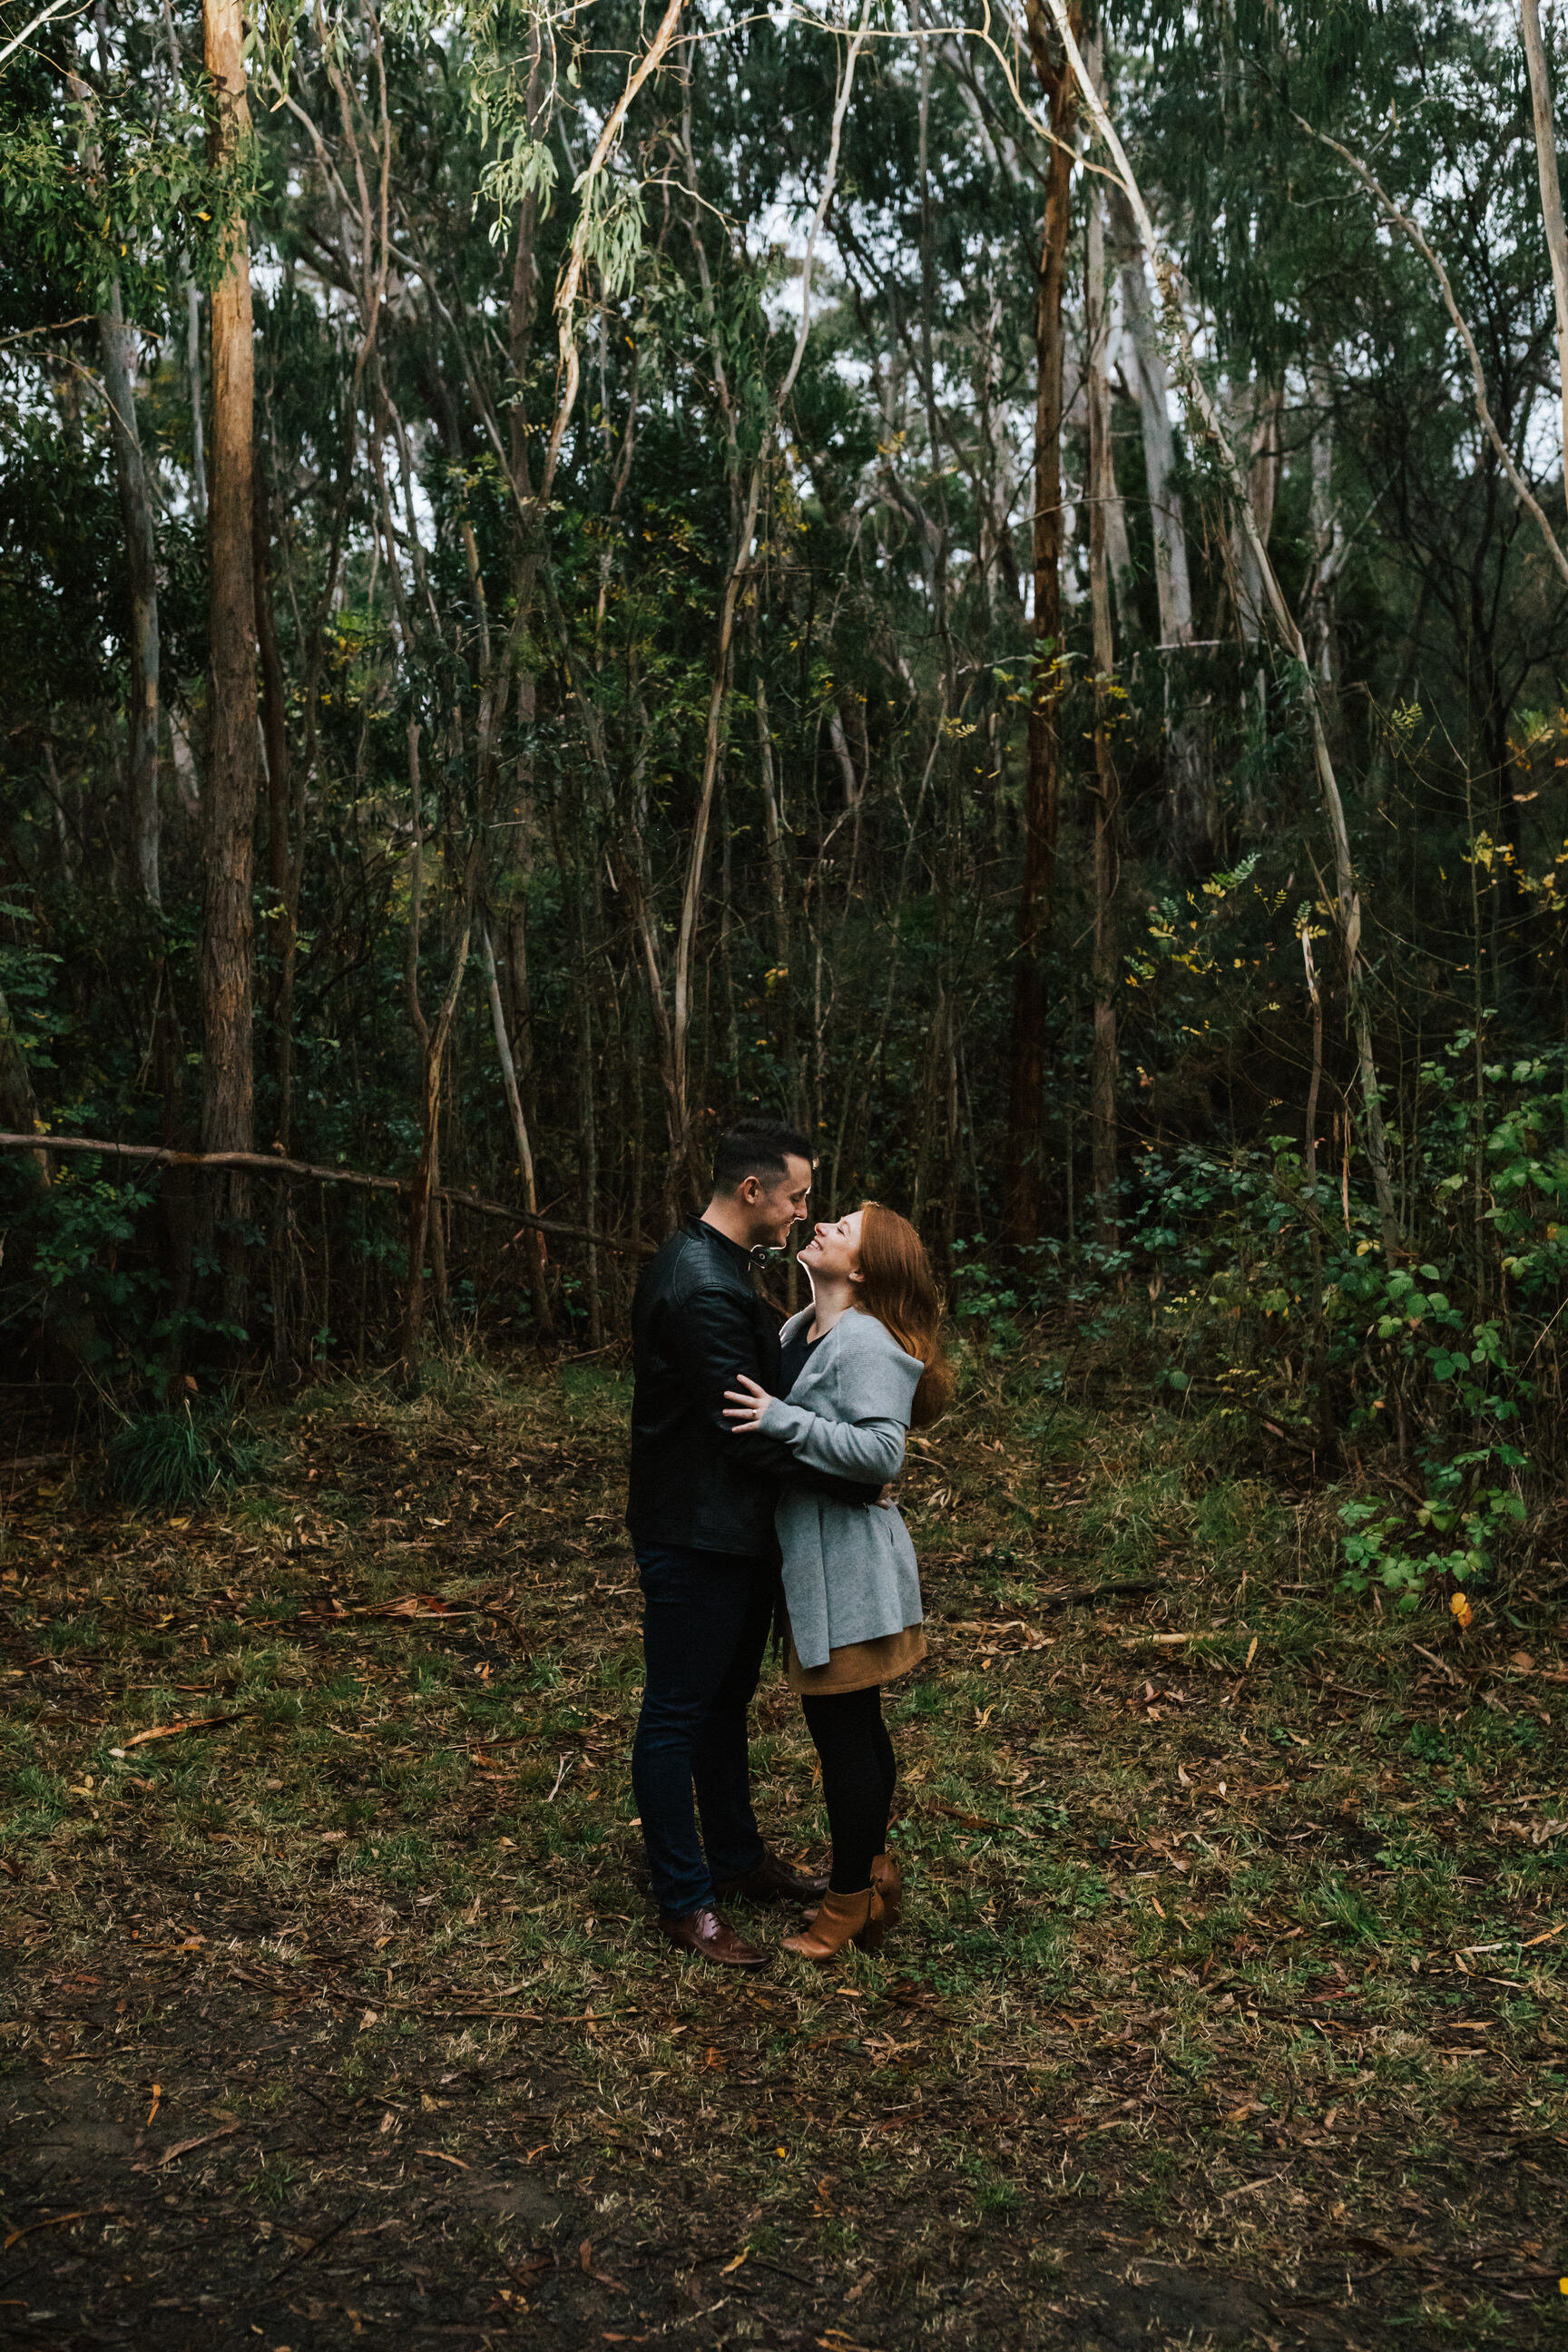 Wintery Autumn Adelaide Hills Engagement Session 22.JPG